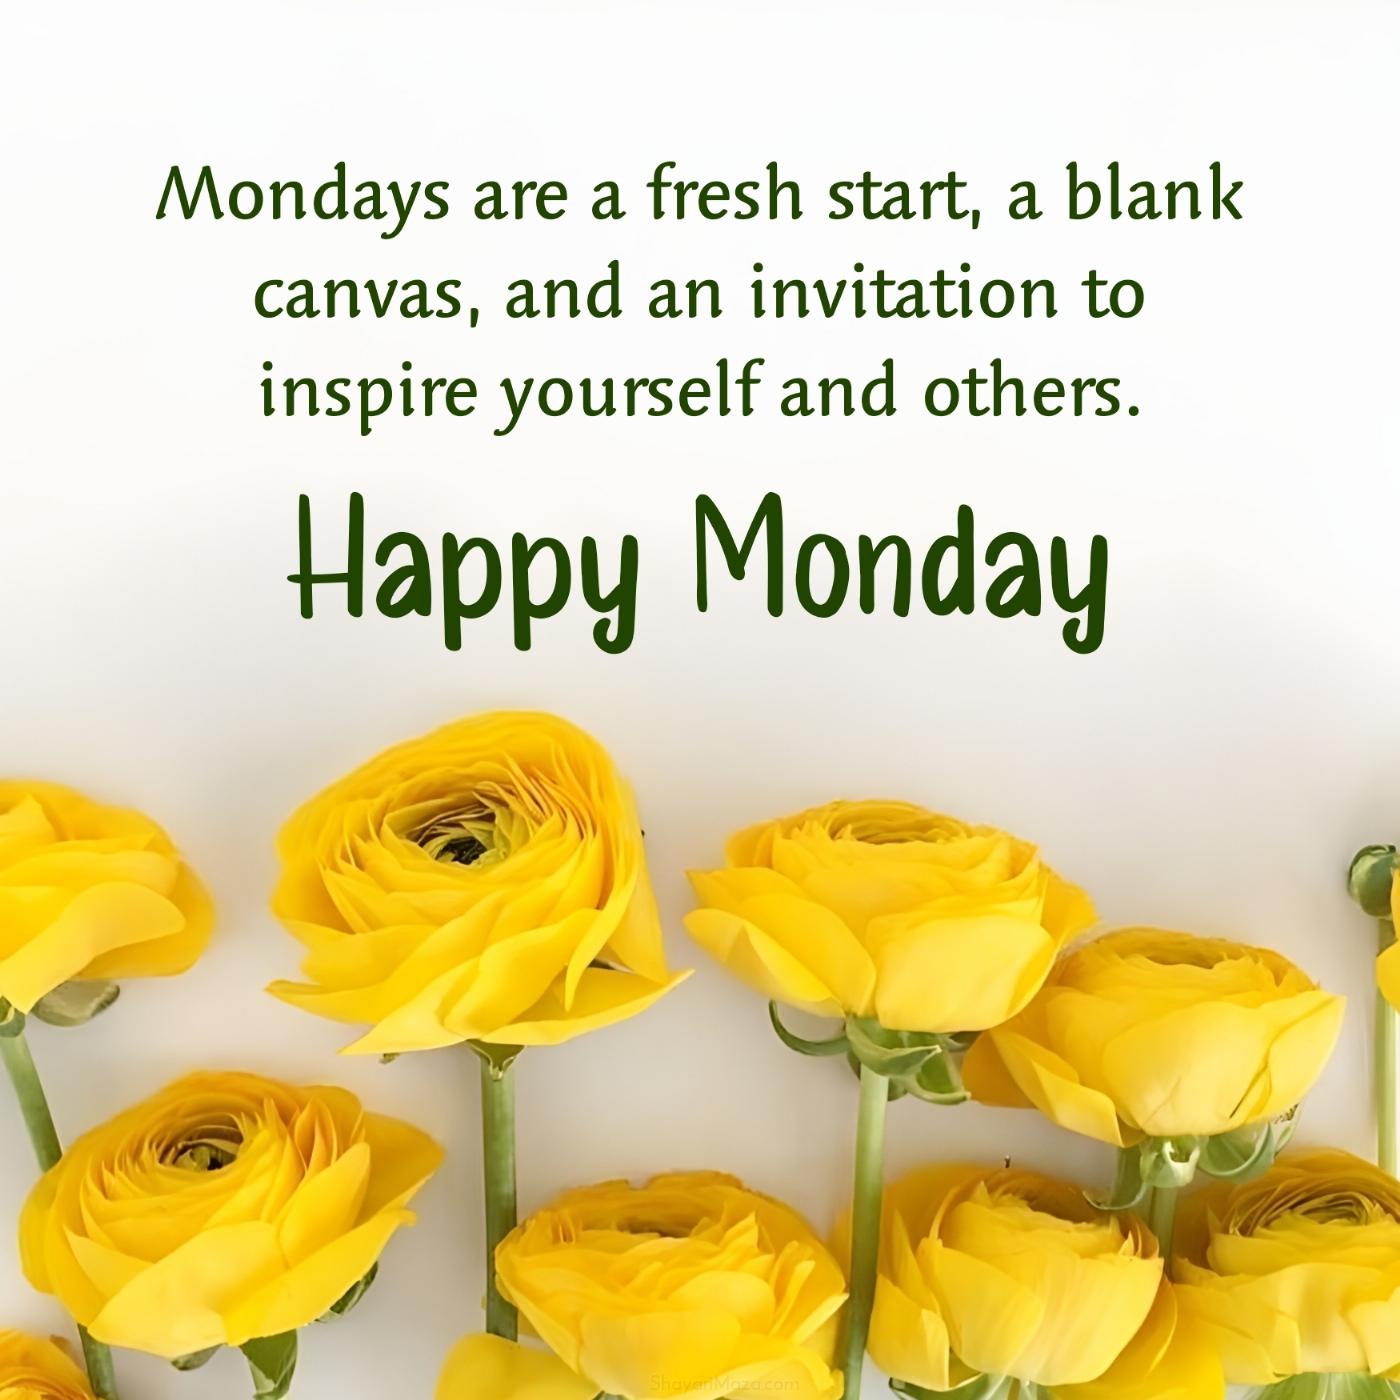 Mondays are a fresh start a blank canvas and an invitation